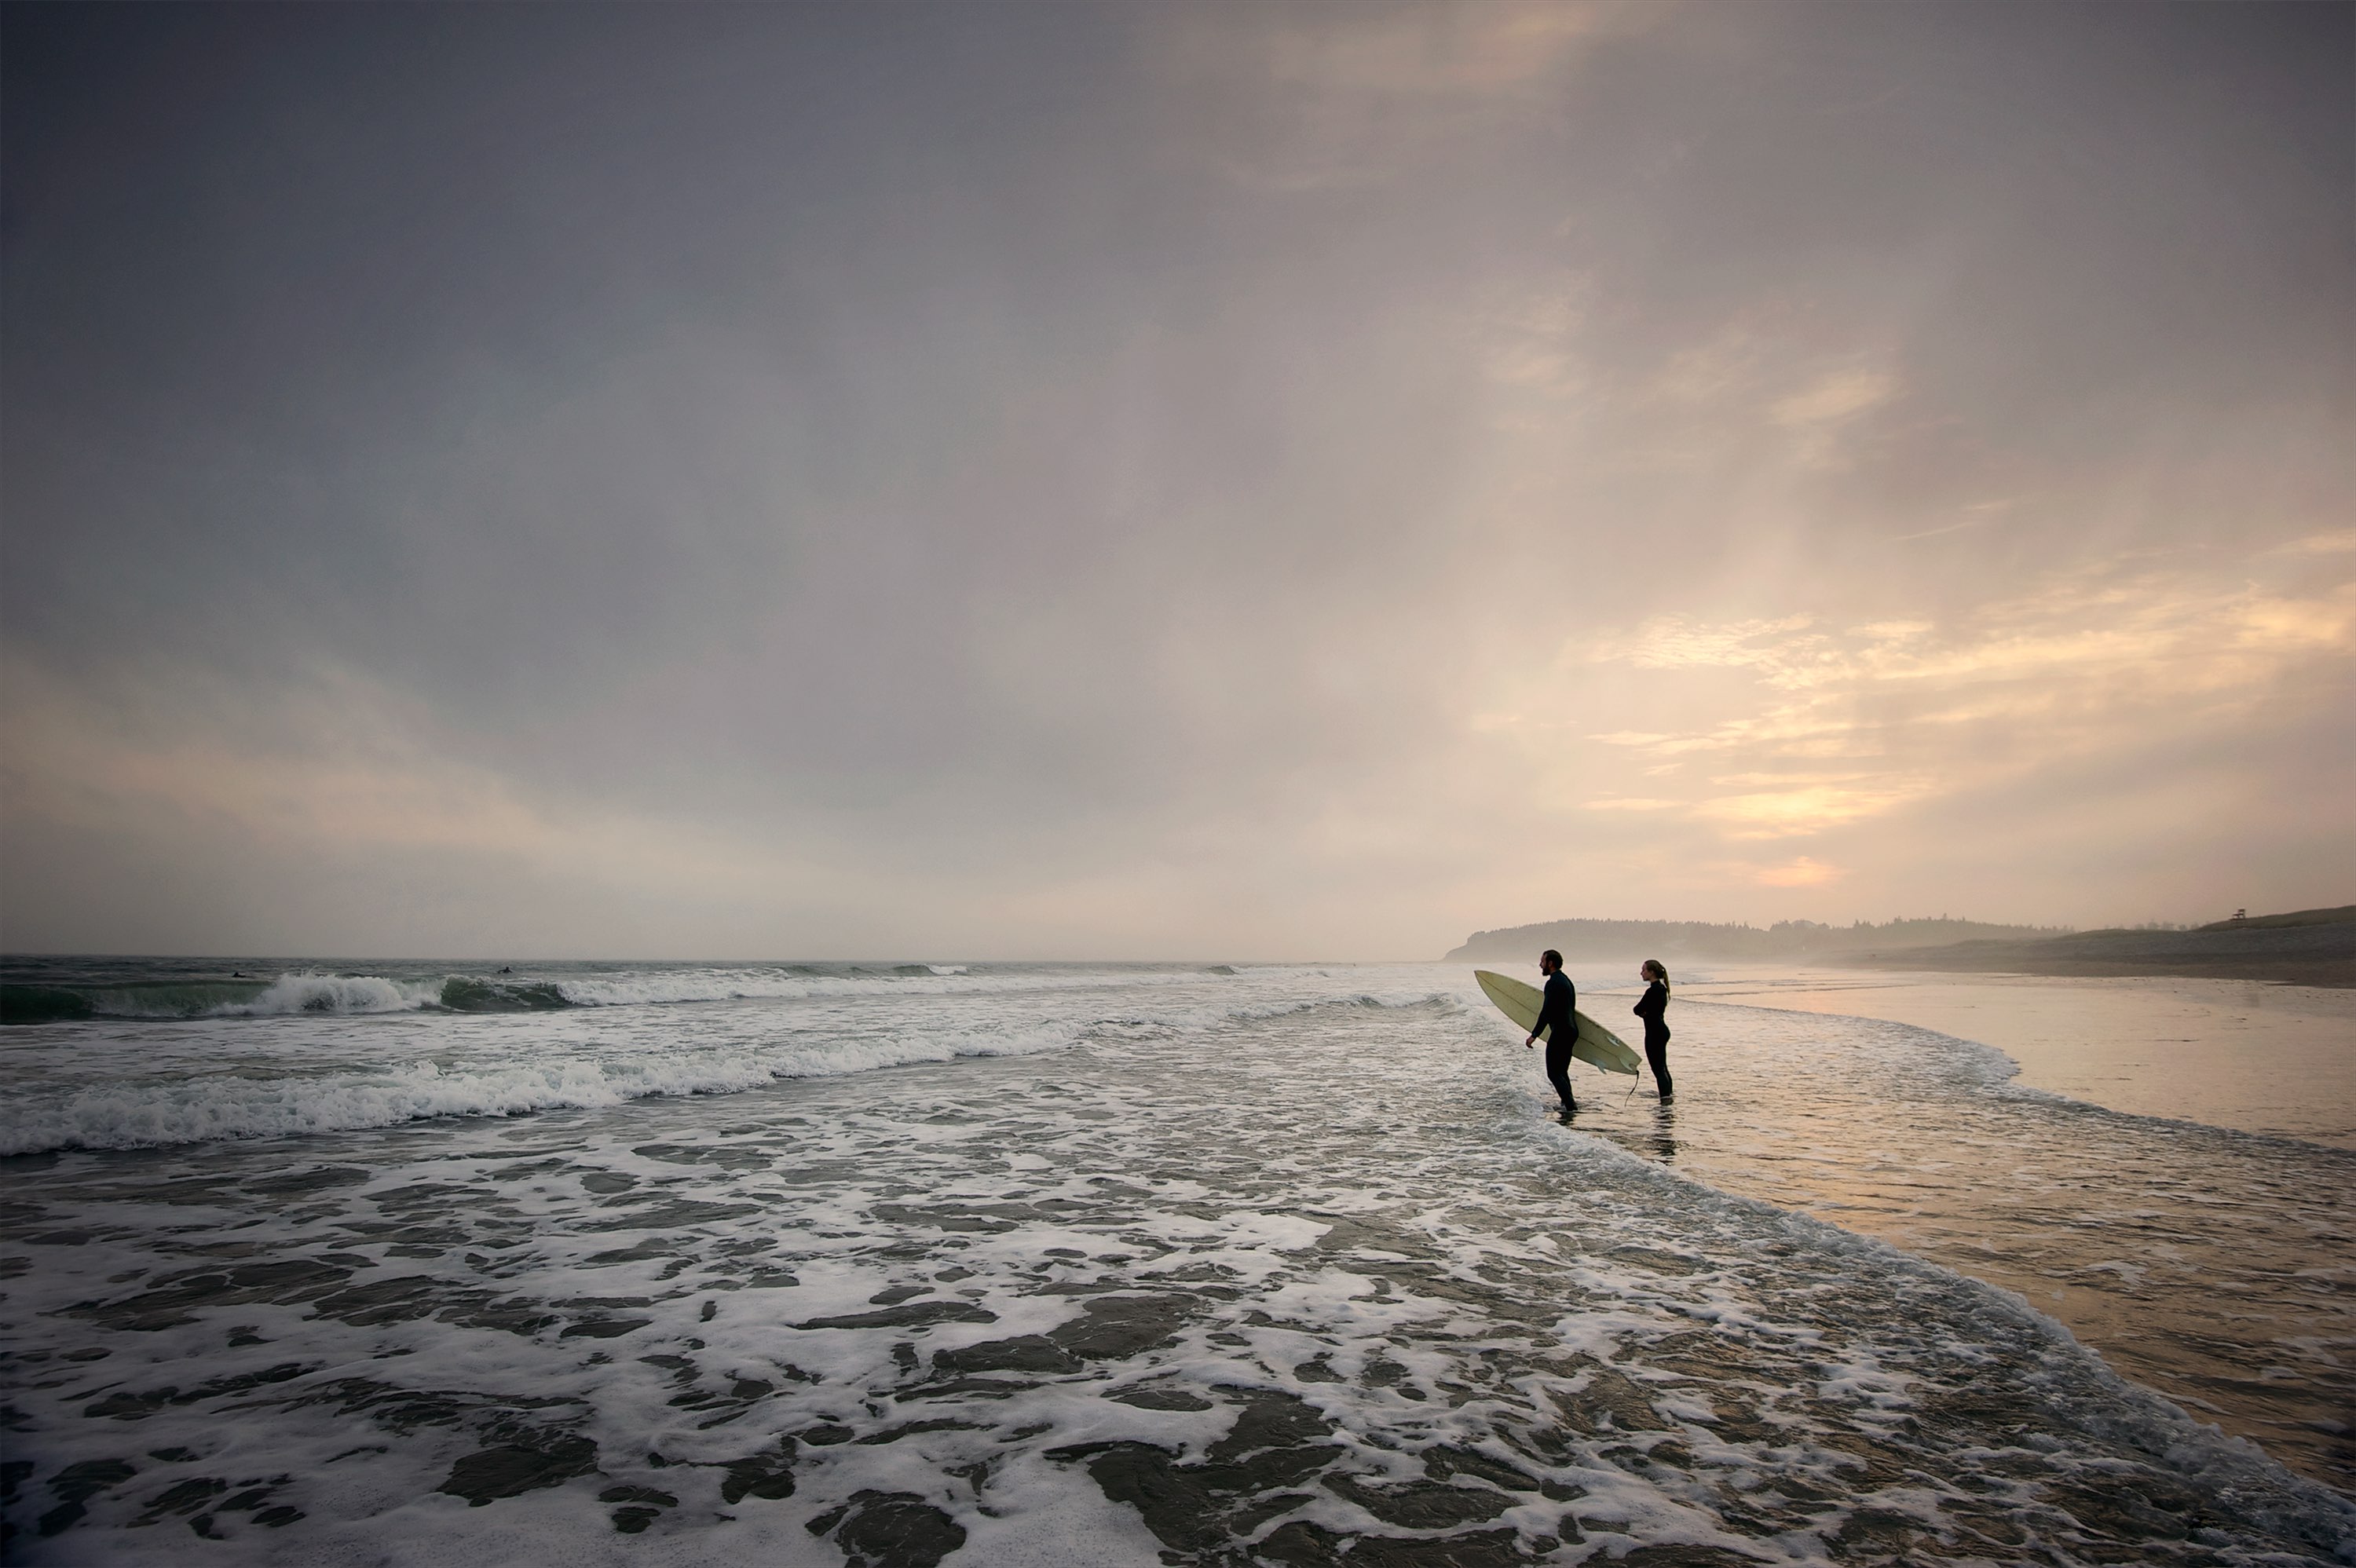 Two surfers standing in the waves of a beach on the shore